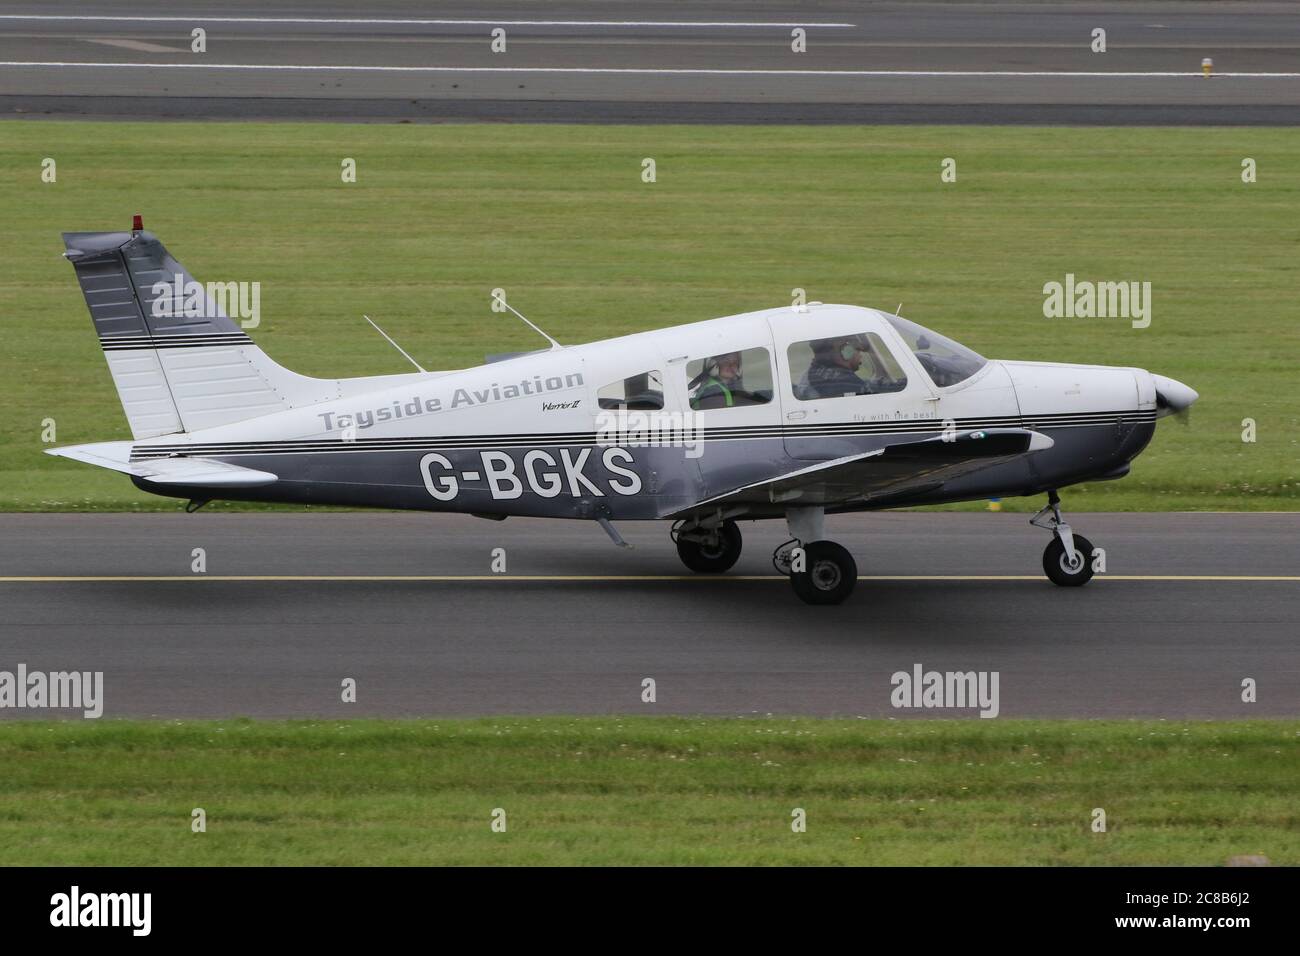 G-BGKS, a Piper PA-28-161 Cherokee Warrior II operated by Tayside Aviation, at Prestwick Airport in Ayrshire. Stock Photo